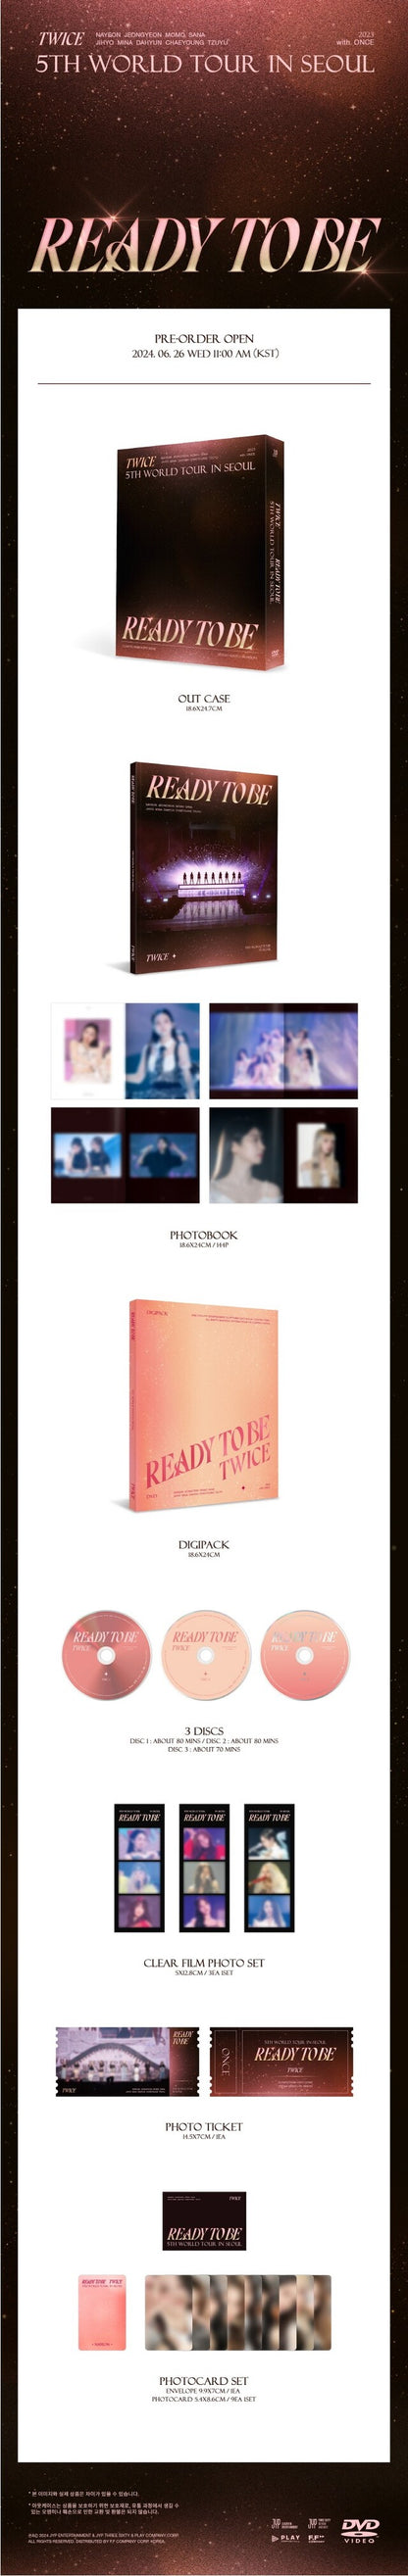 [PREORDER] JYP SHOP TWICE - 5TH WORLD TOUR READY TO BE IN SEOUL DVD